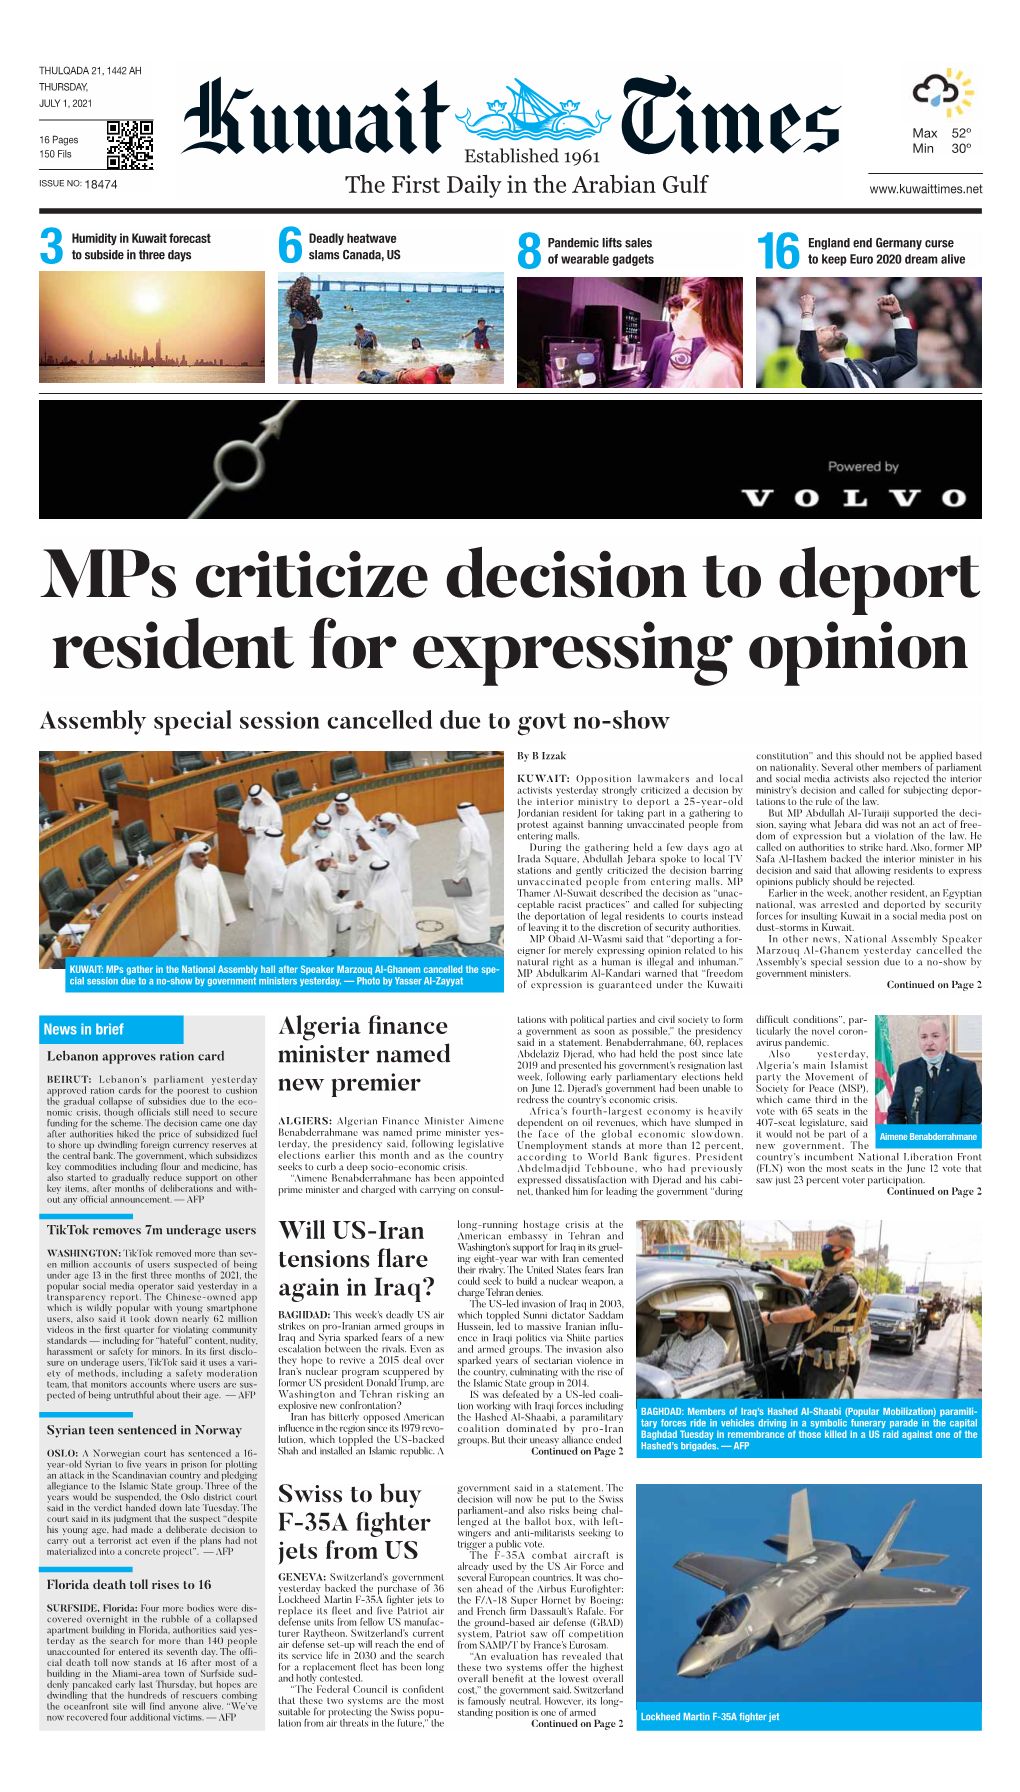 Mps Criticize Decision to Deport Resident for Expressing Opinion